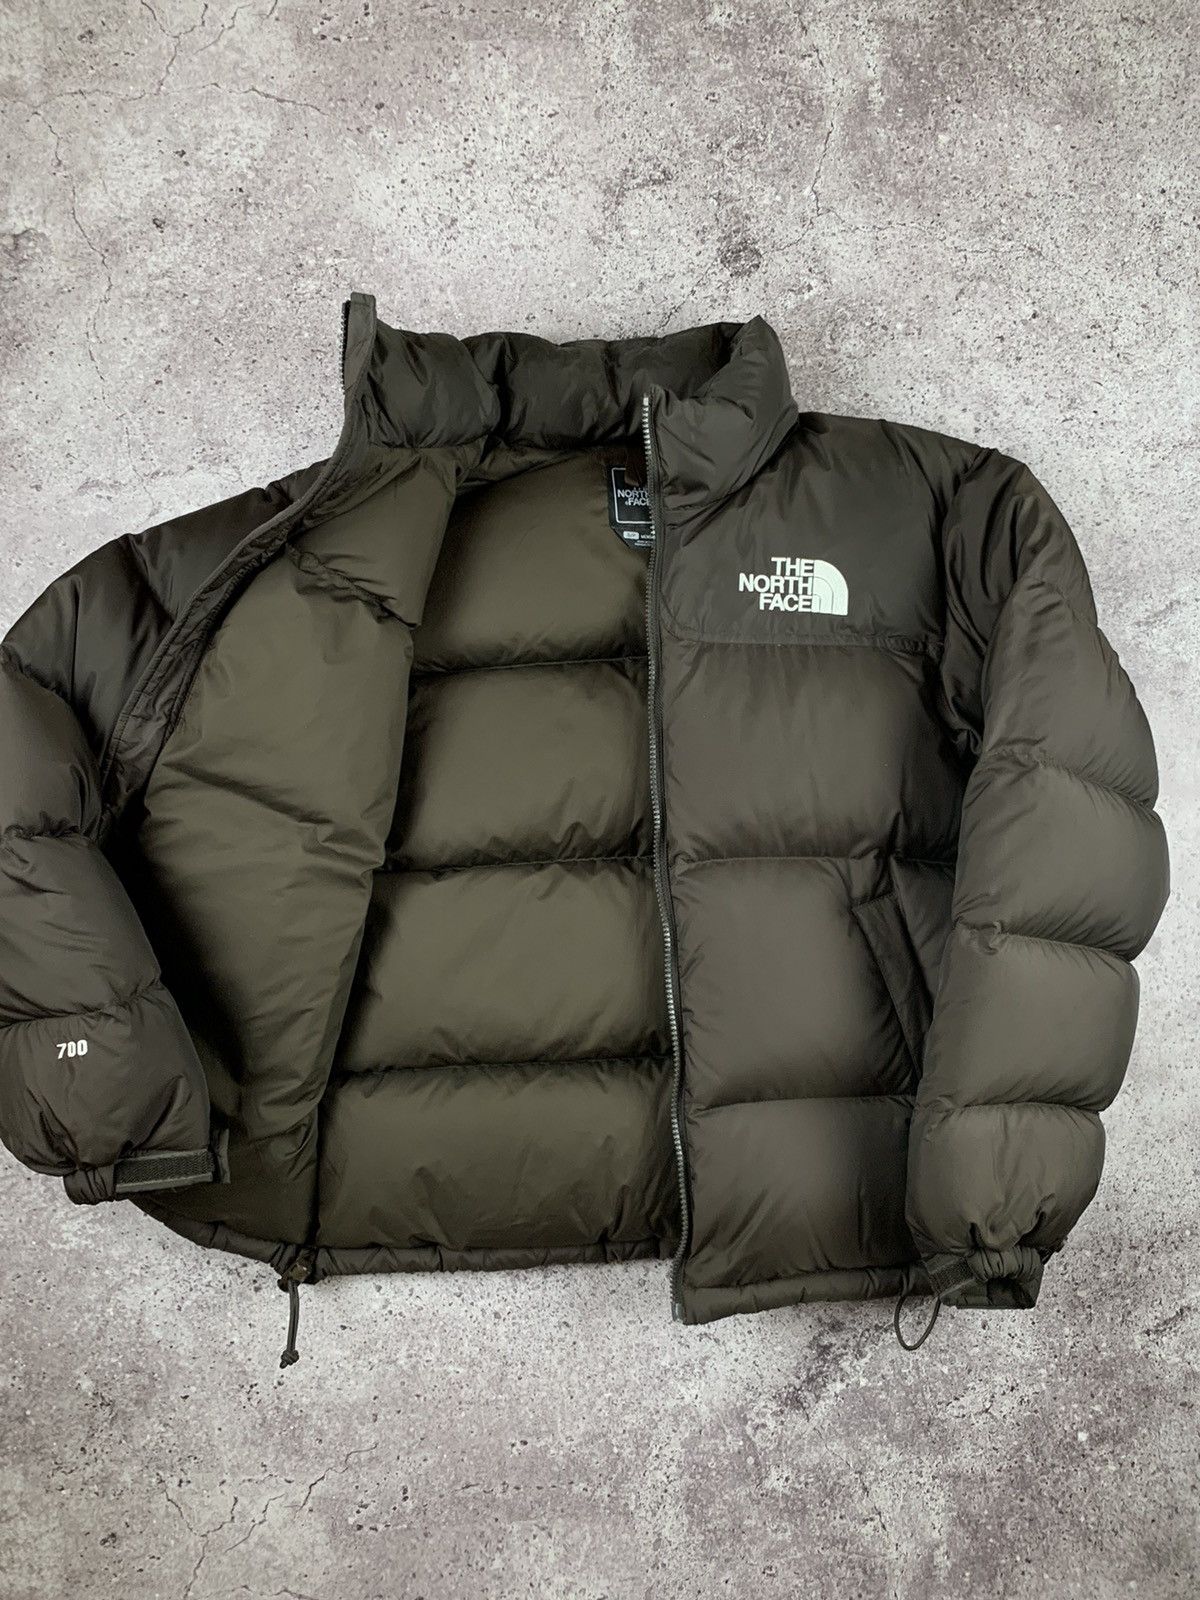 Pre-owned Hype X The North Face Brown Jacket The North Face 700 Vintage Very